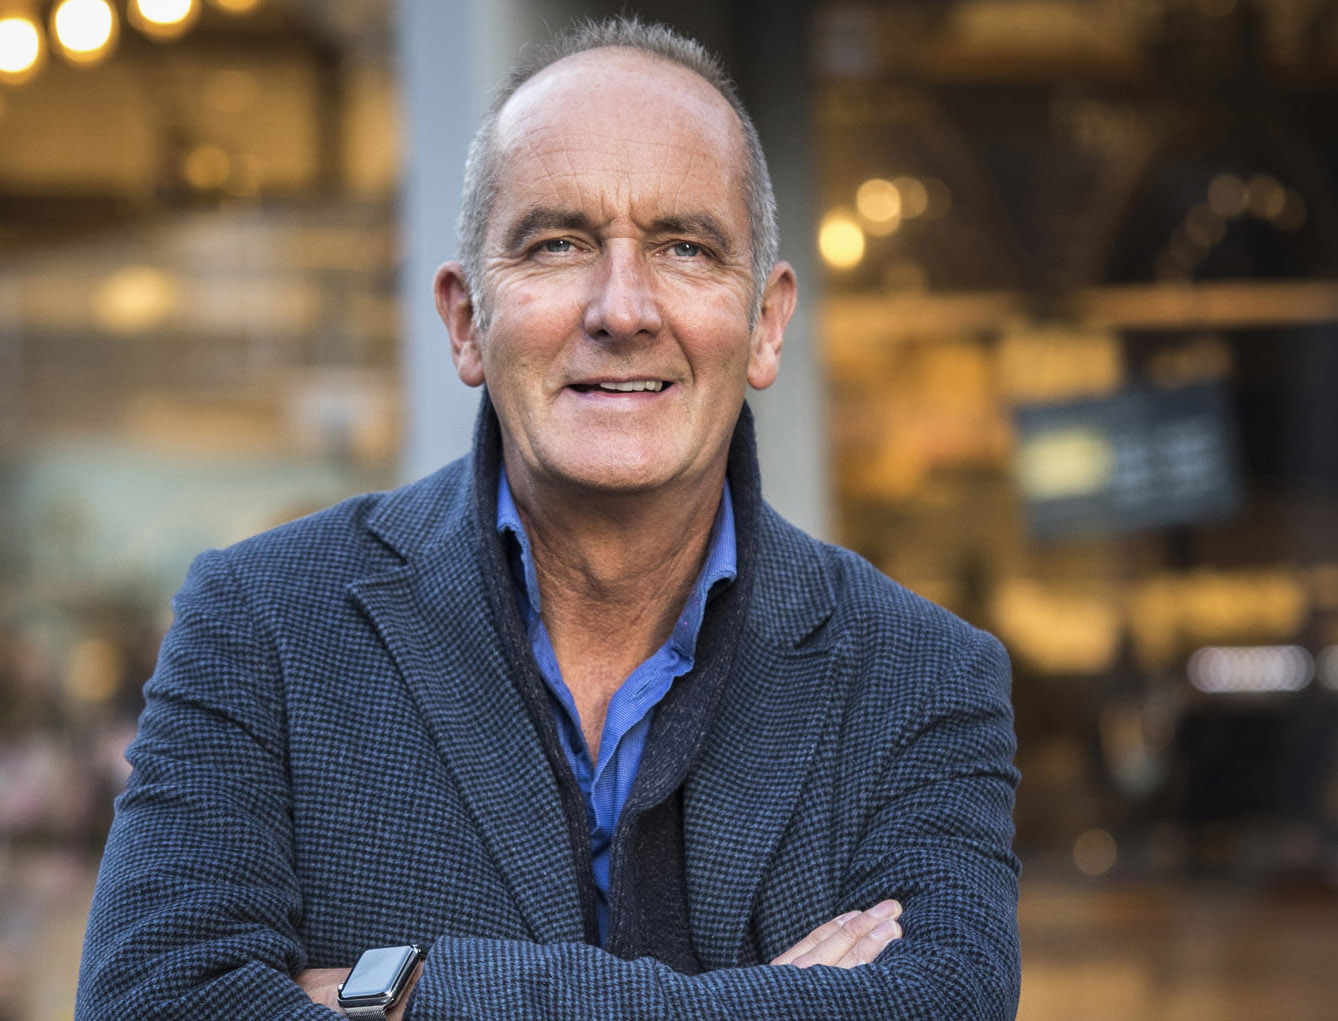 Life according to Kevin McCloud